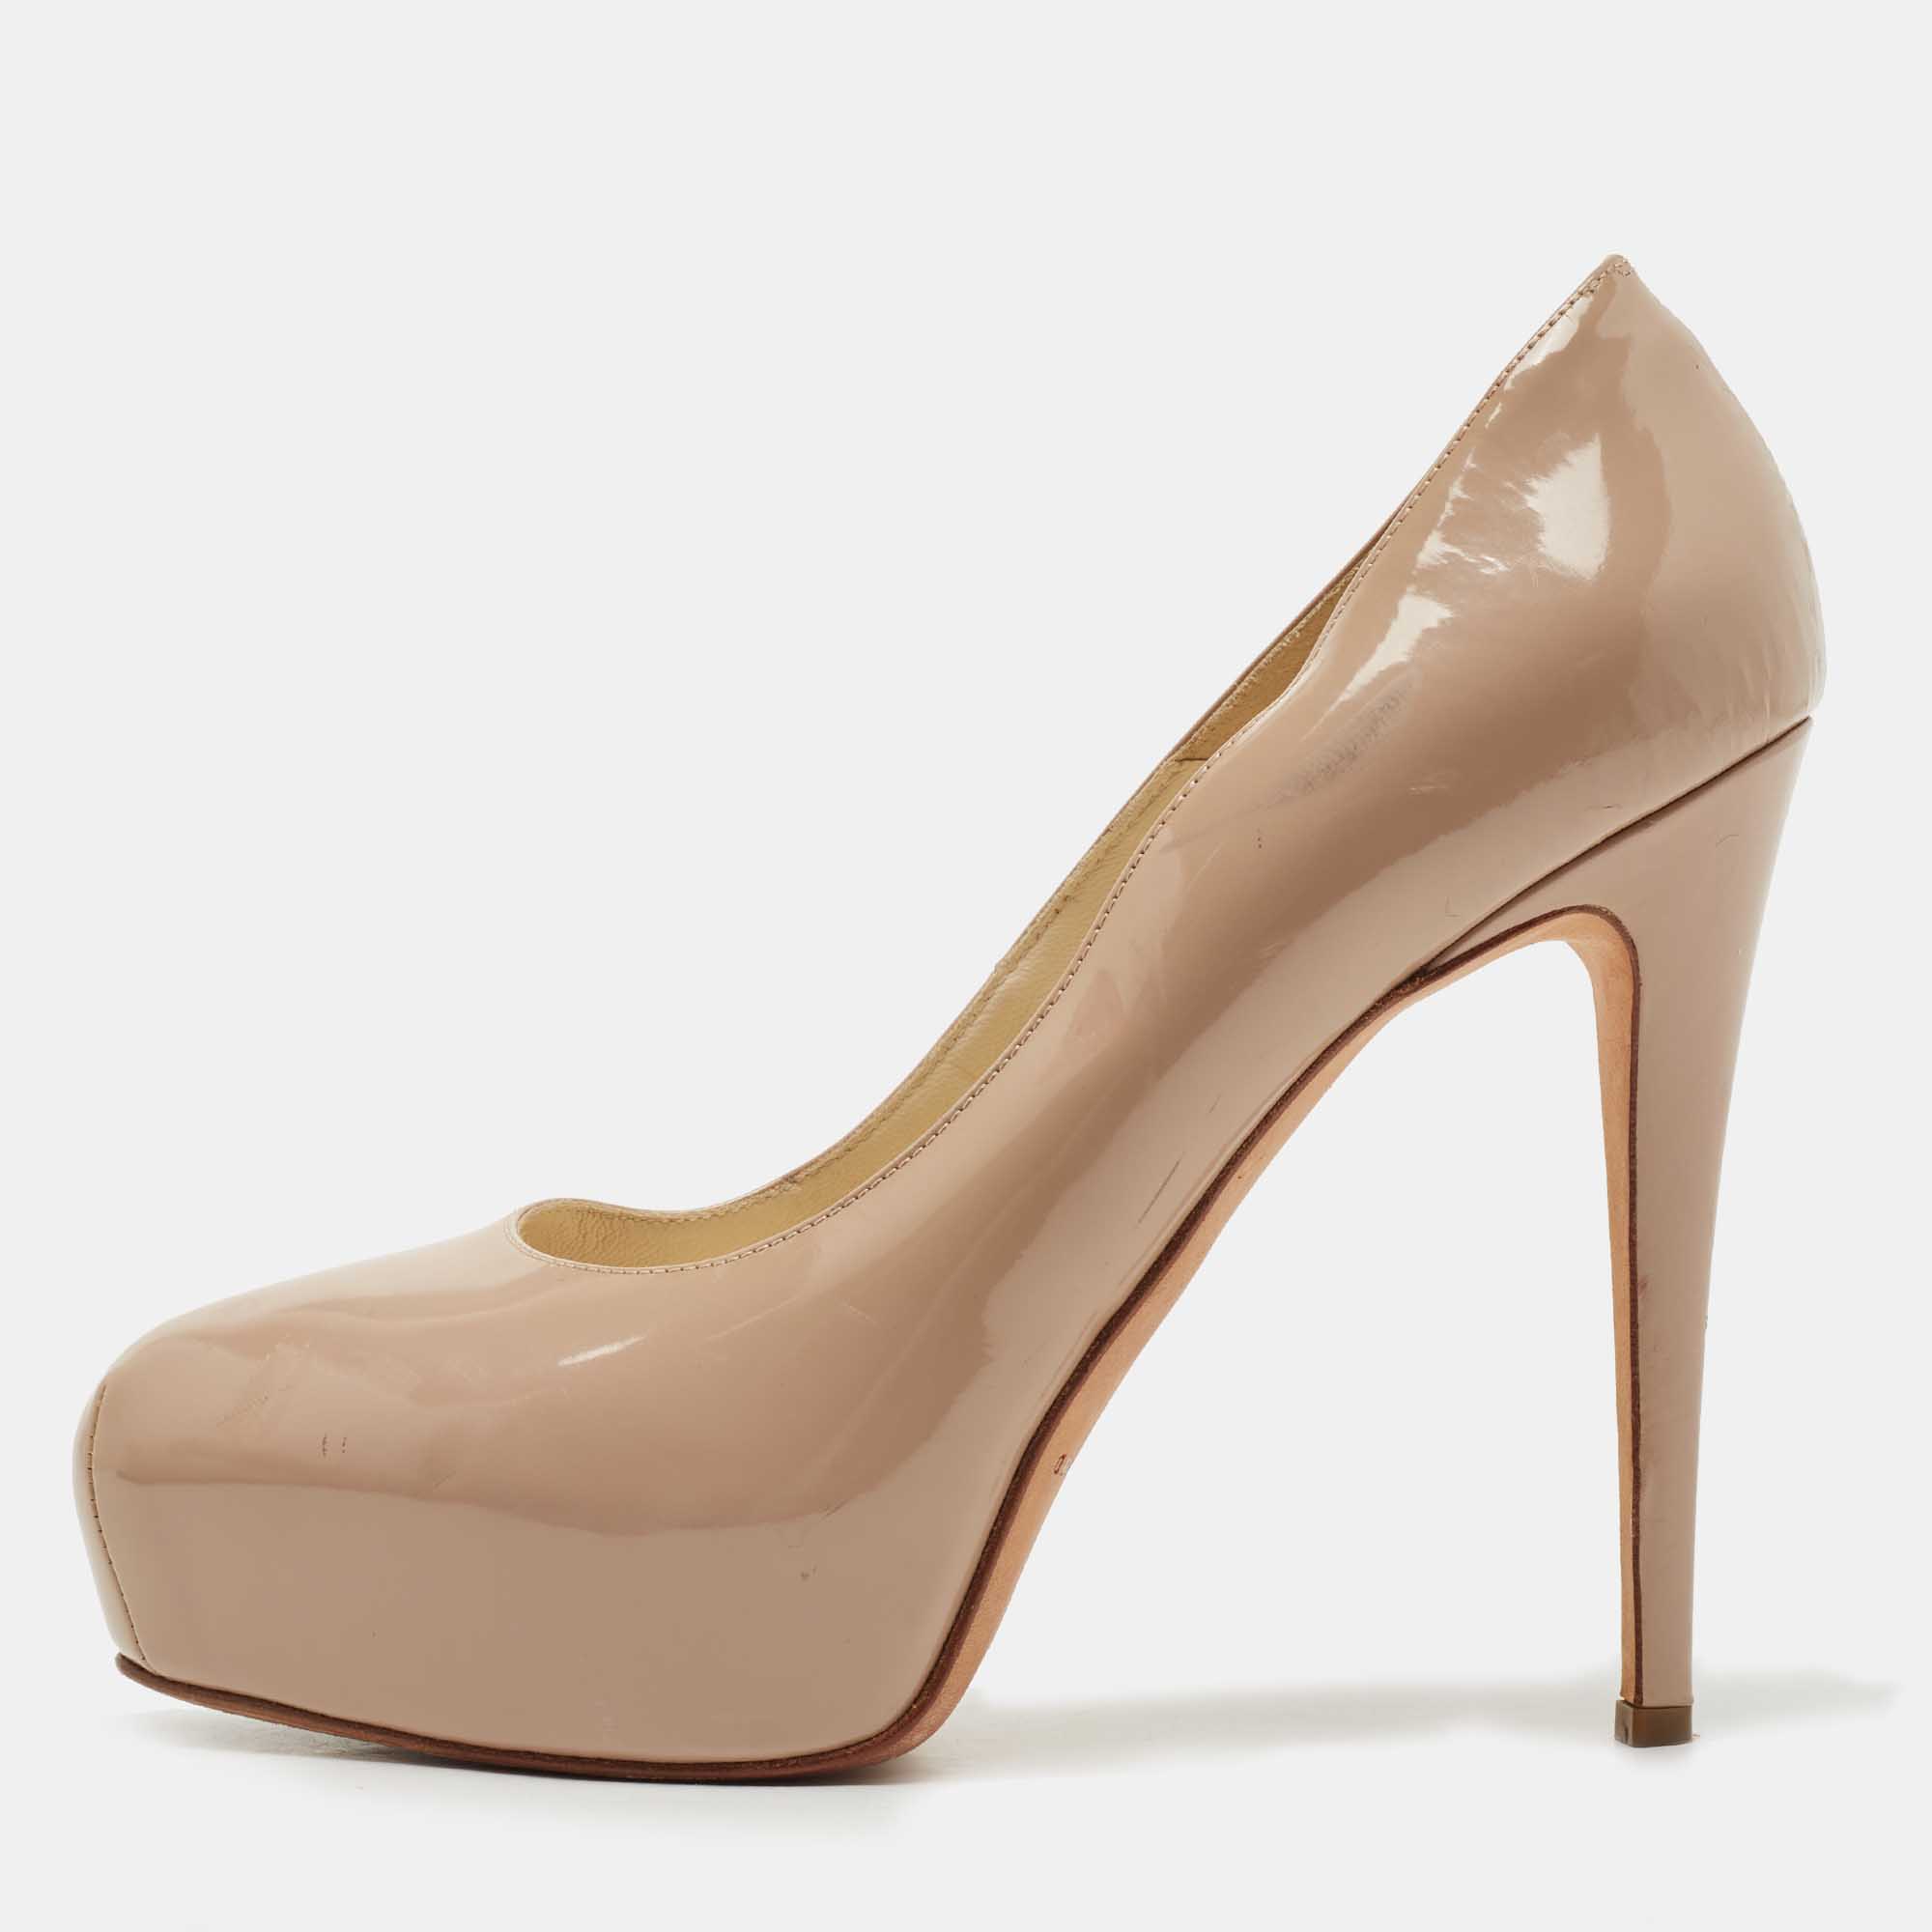 Brian Atwood Beige Patent Leather Platform Pumps Size 39.5